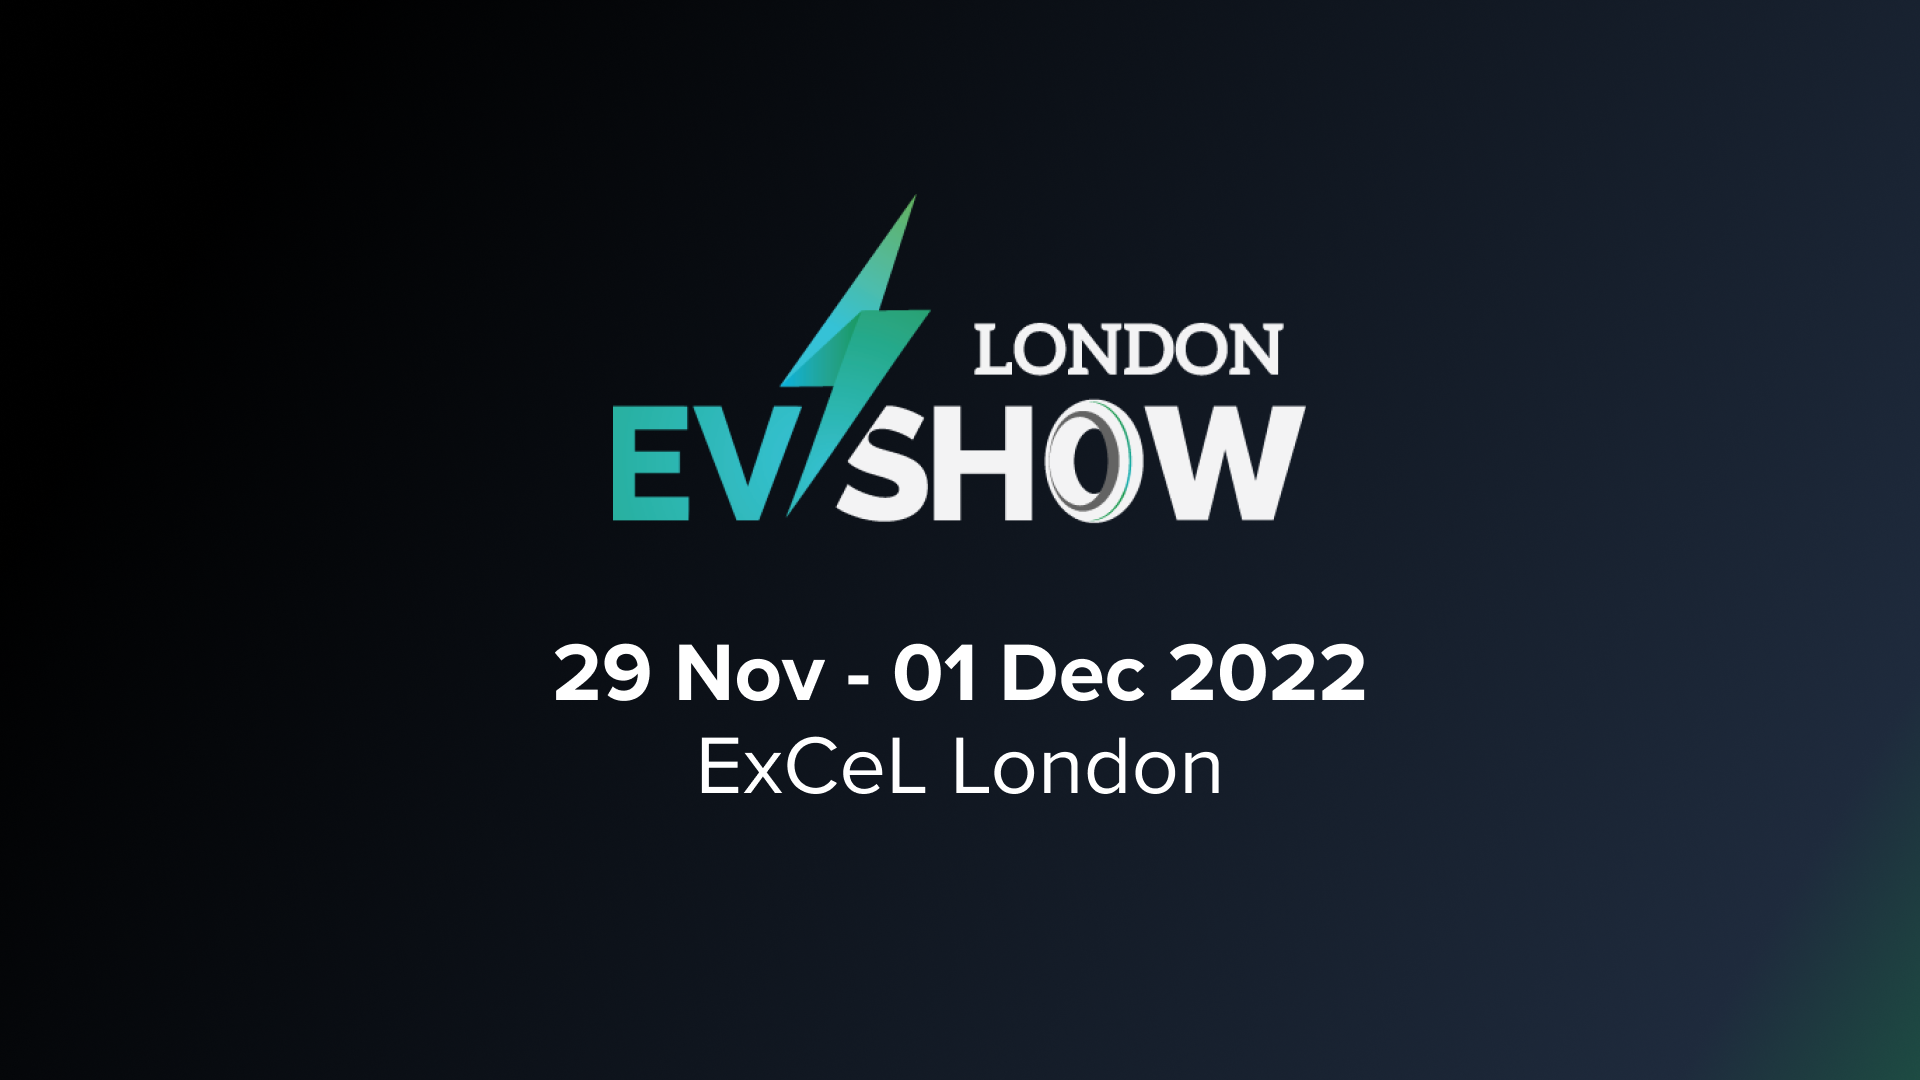 London EV Show 2022 Returns To ExCeL London From 29 Nov to 1 Dec 2022